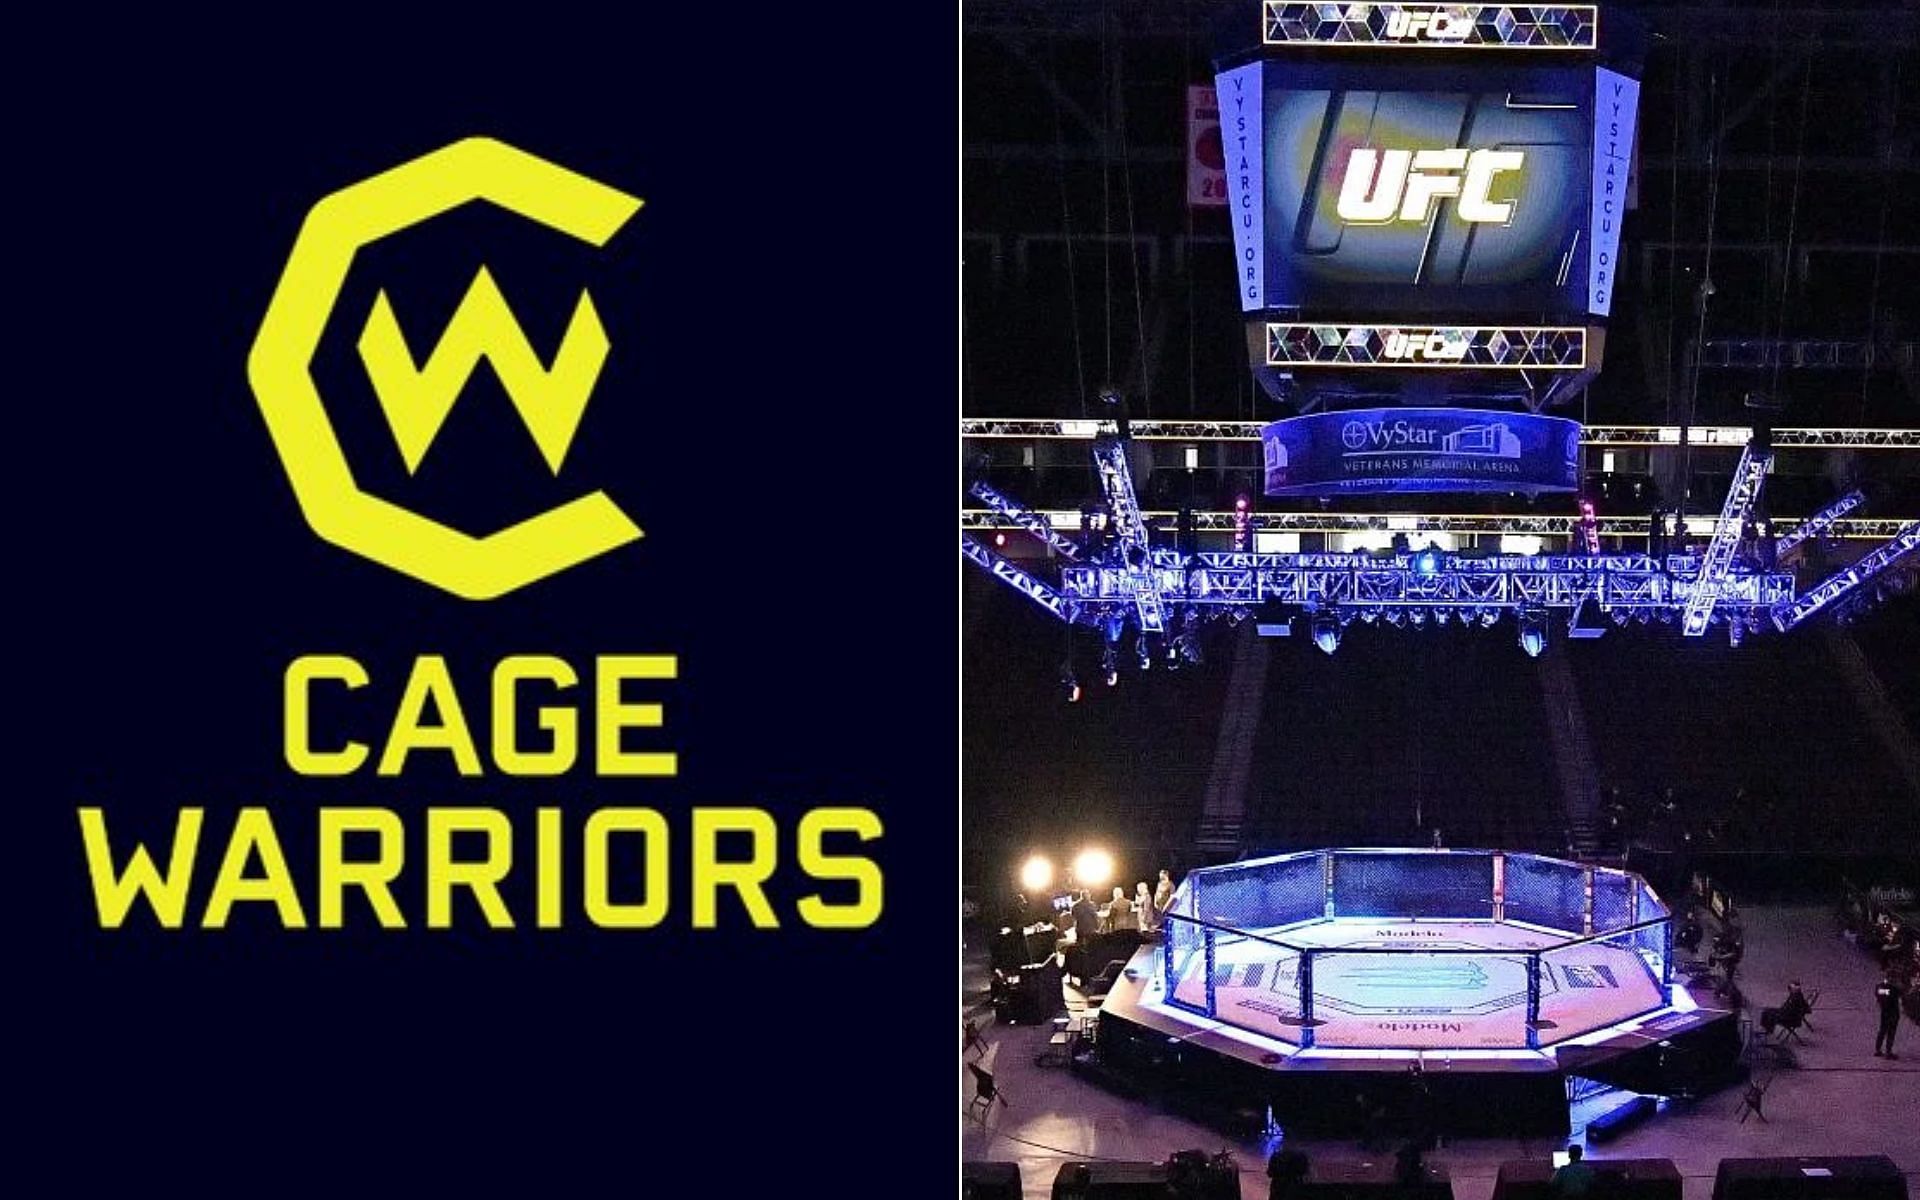 Cage Warriors logo [Left], and UFC octagon [Right] [Photo credit: @CageWarriors - Twitter]